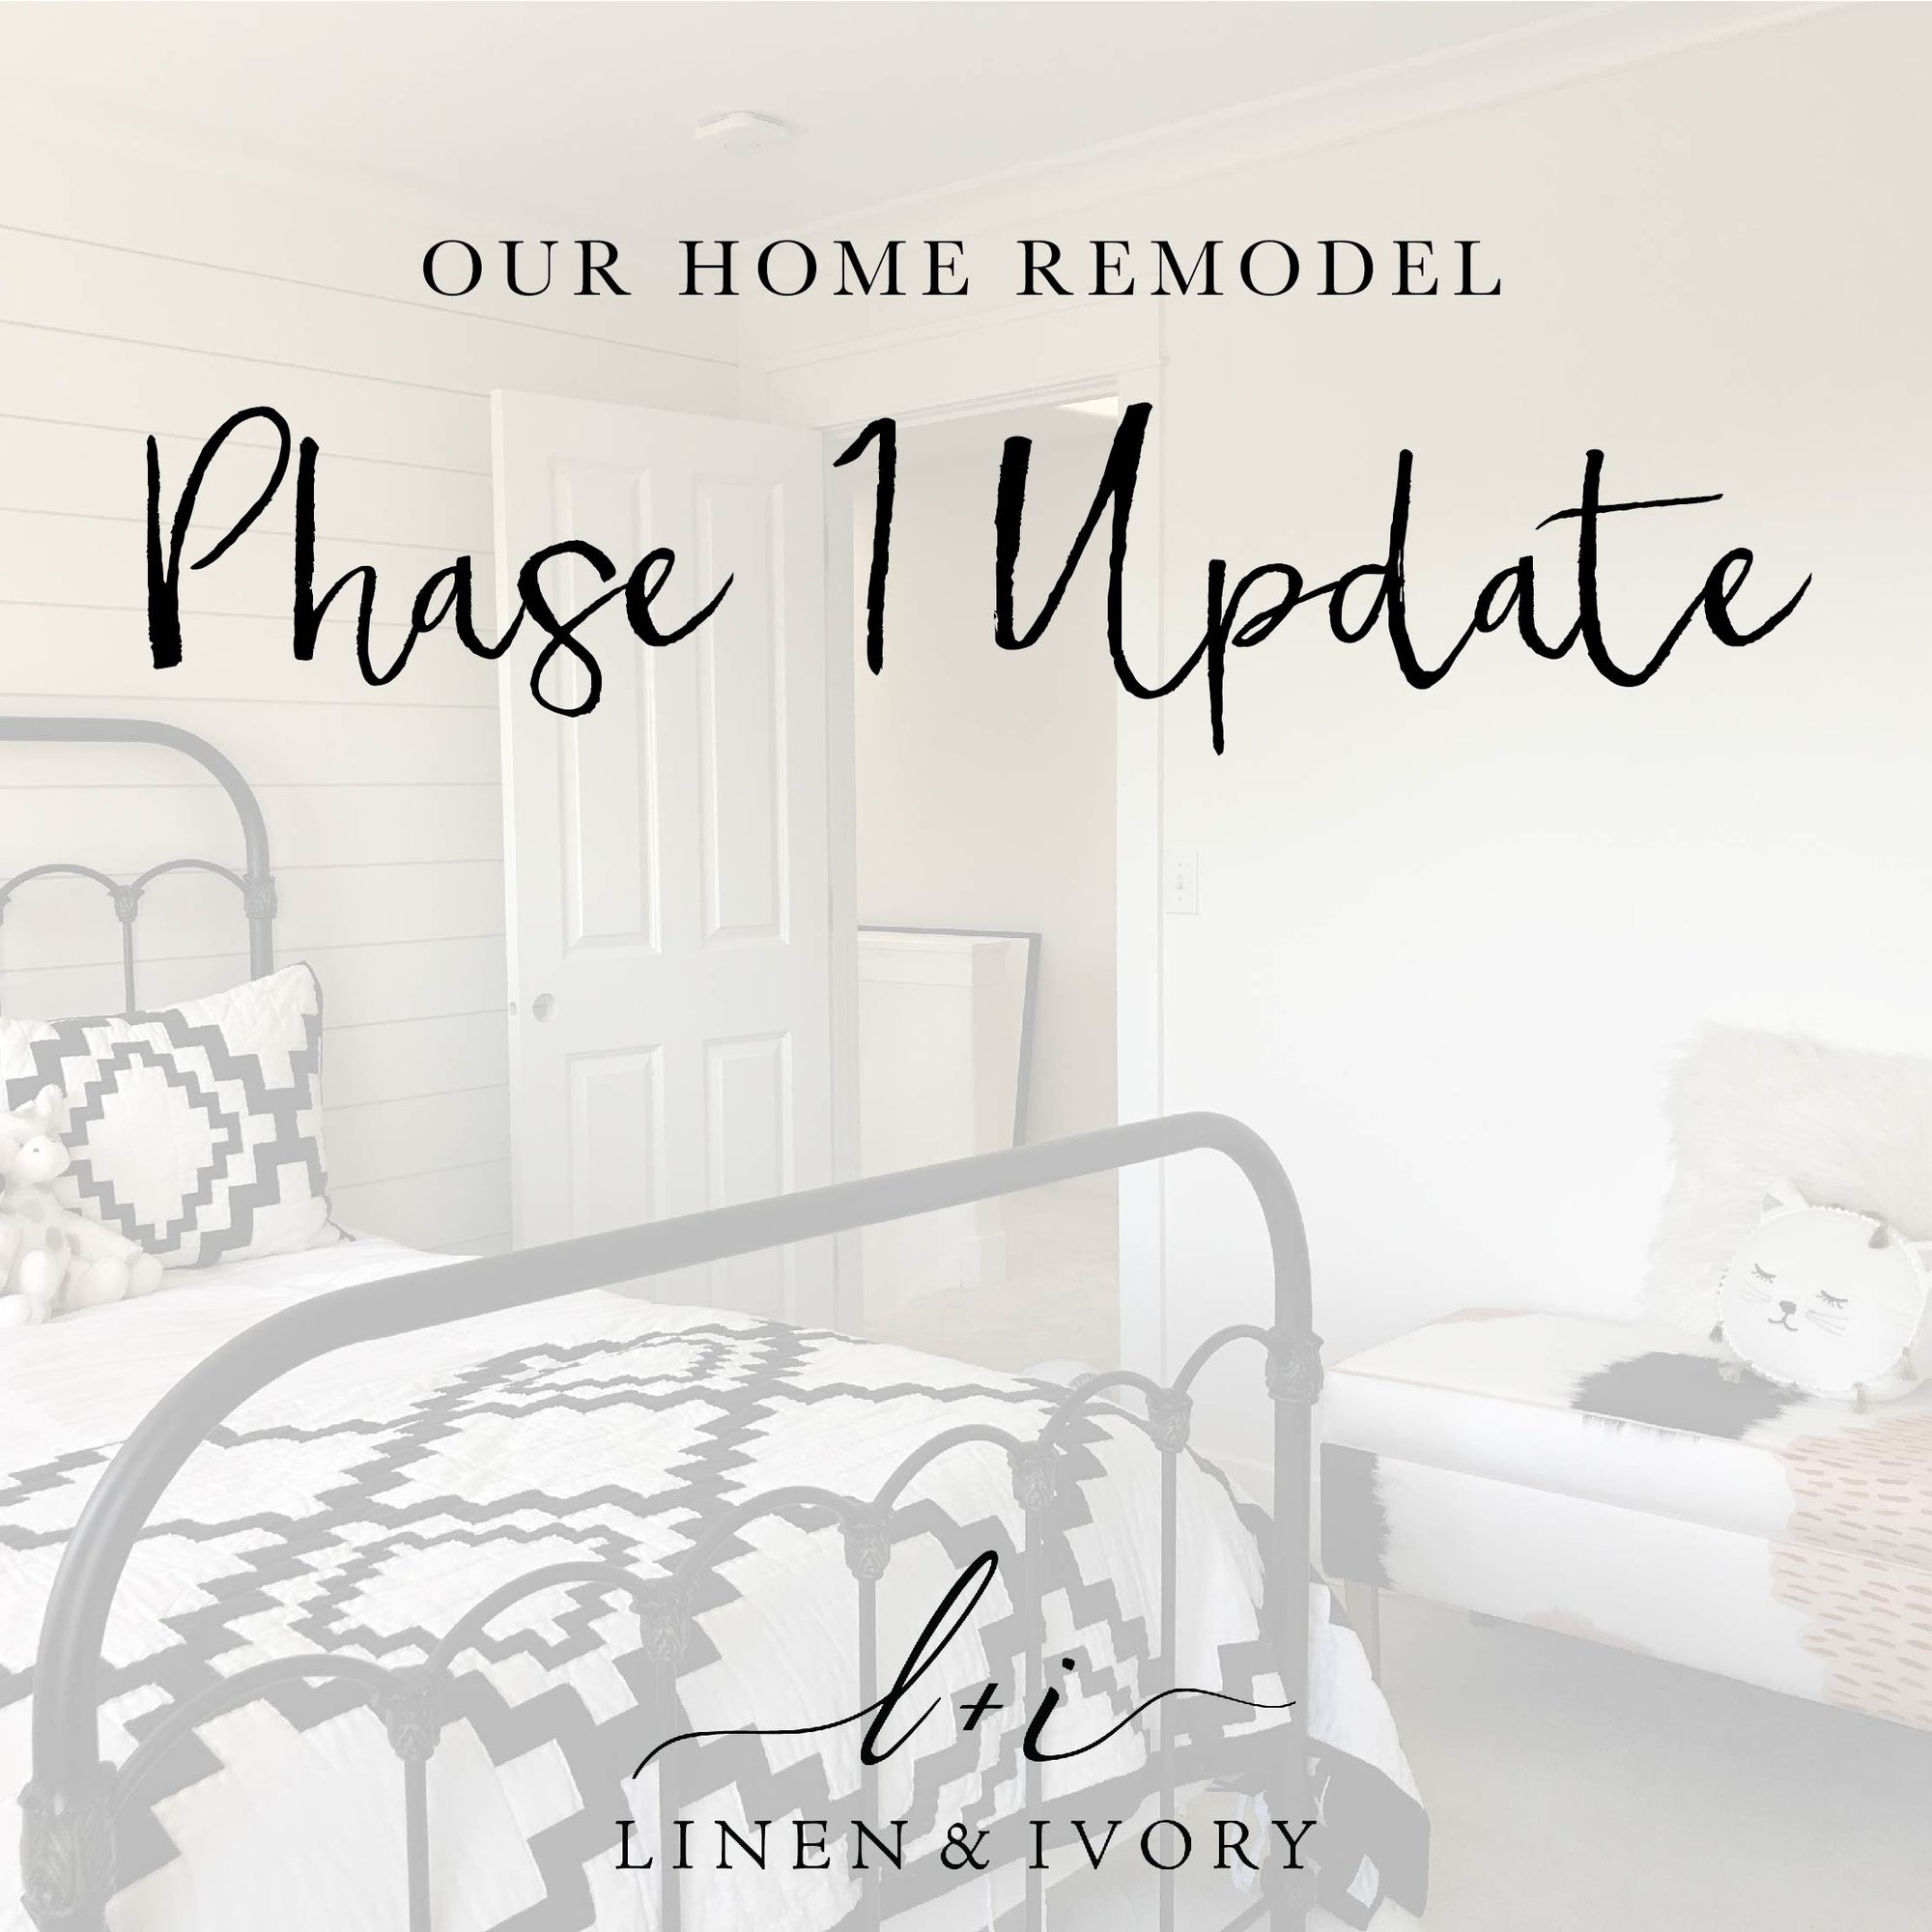 Our Home Remodel: Phase 1